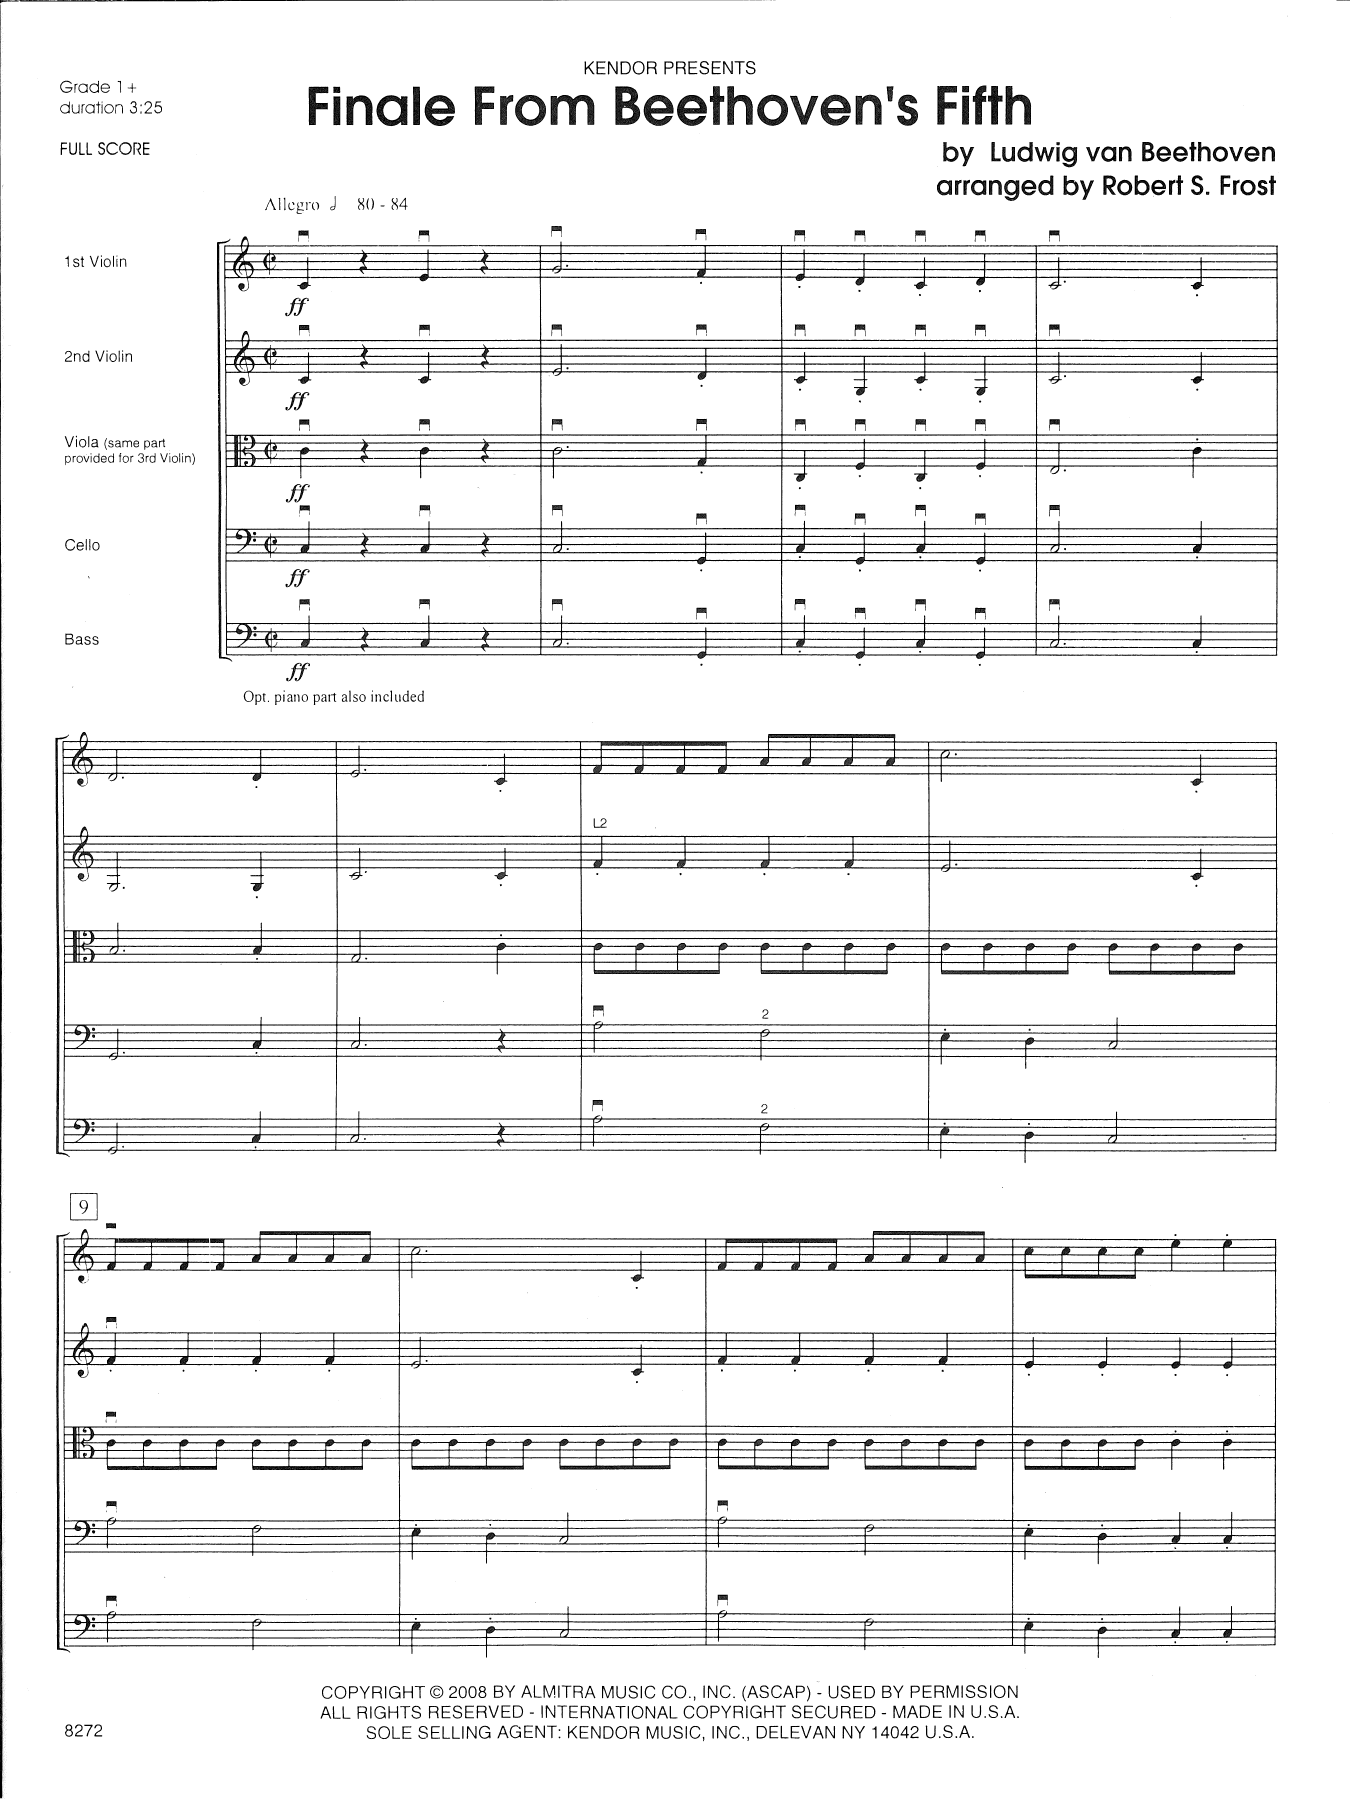 Download Ludwig van Beethoven Finale From Beethoven's Fifth - Full Sc Sheet Music